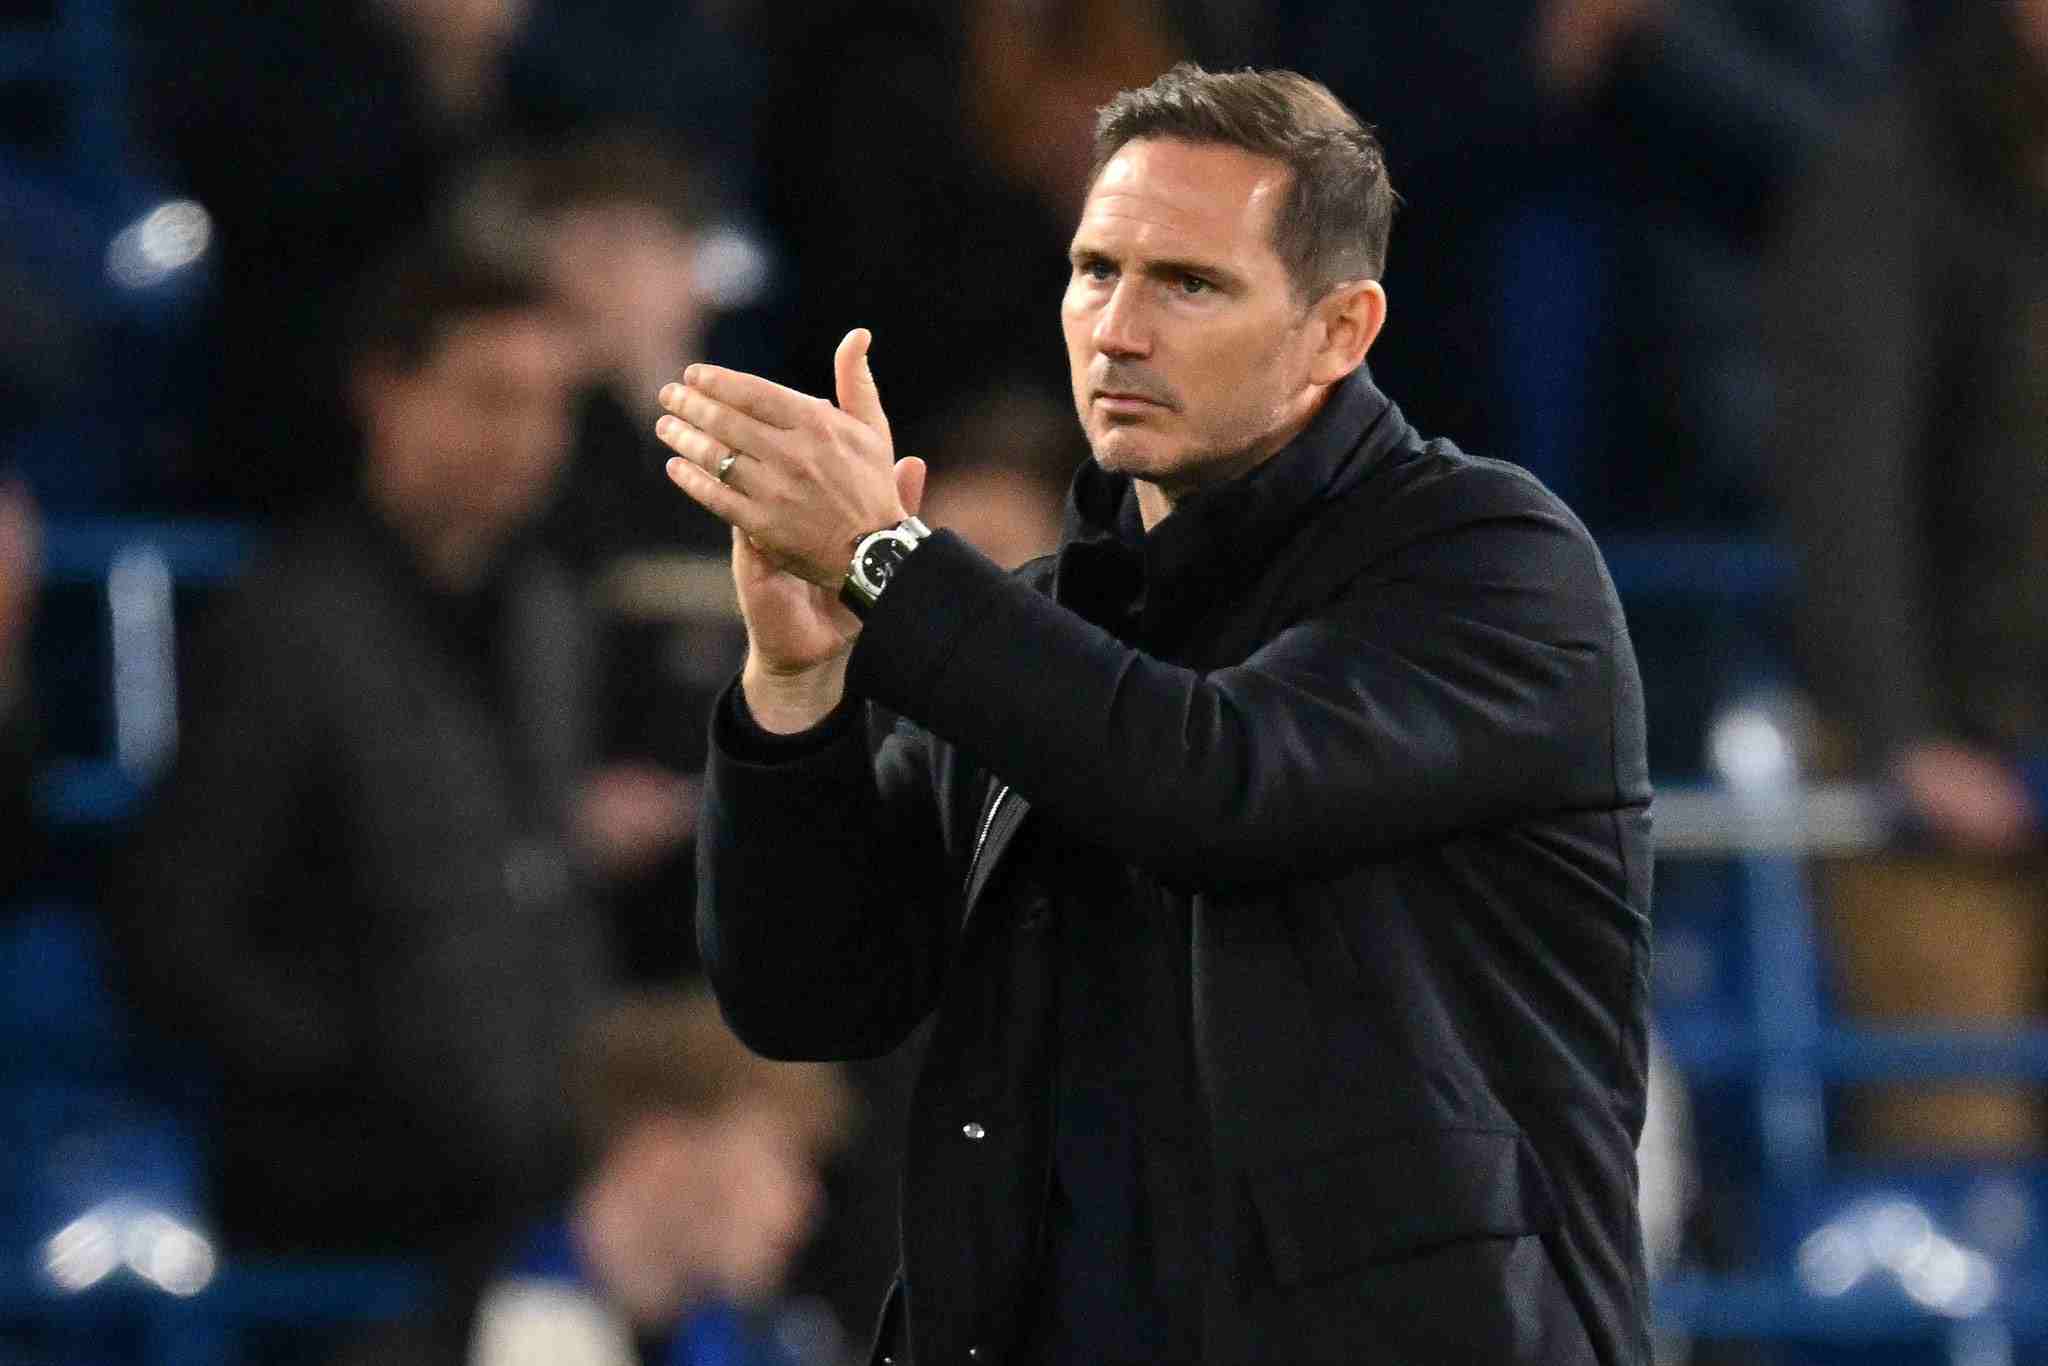 Frank Lampard’s response to Didier Drogba’s brutal swipe at Chelsea